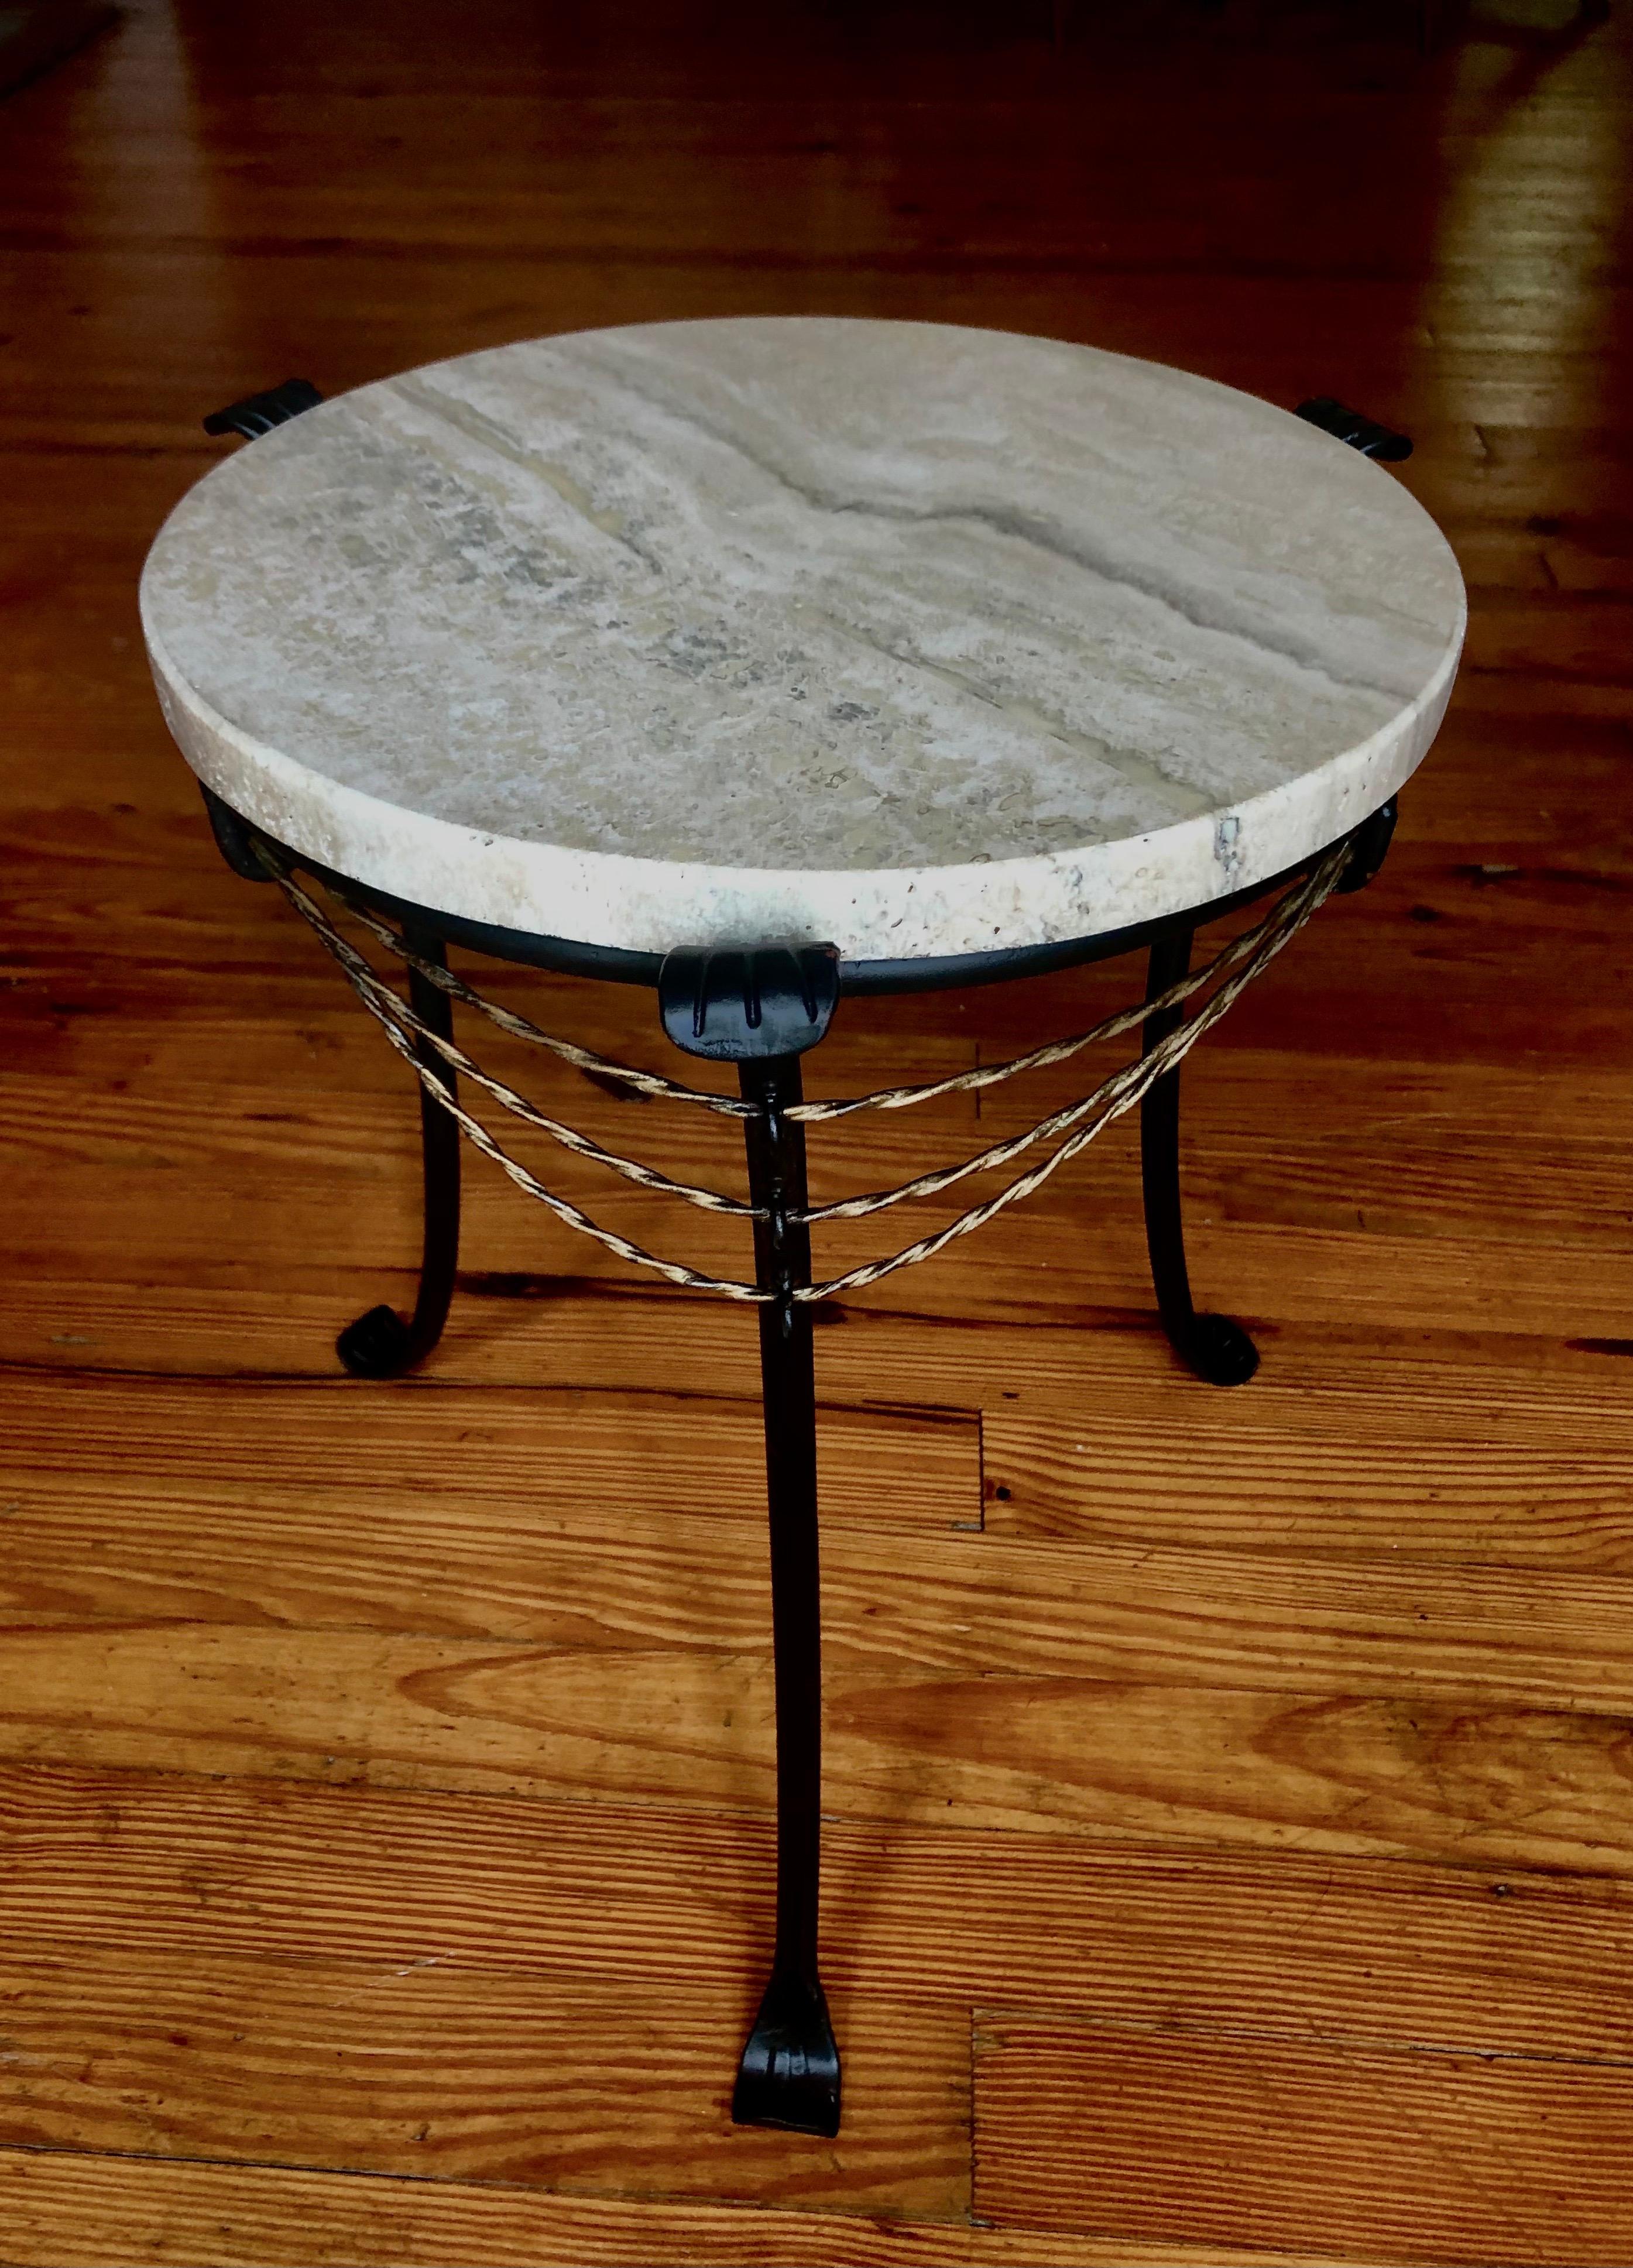 20th Century French Mid-Century Modern Neoclassical Gilt Wrought Iron & Travertine Side Table